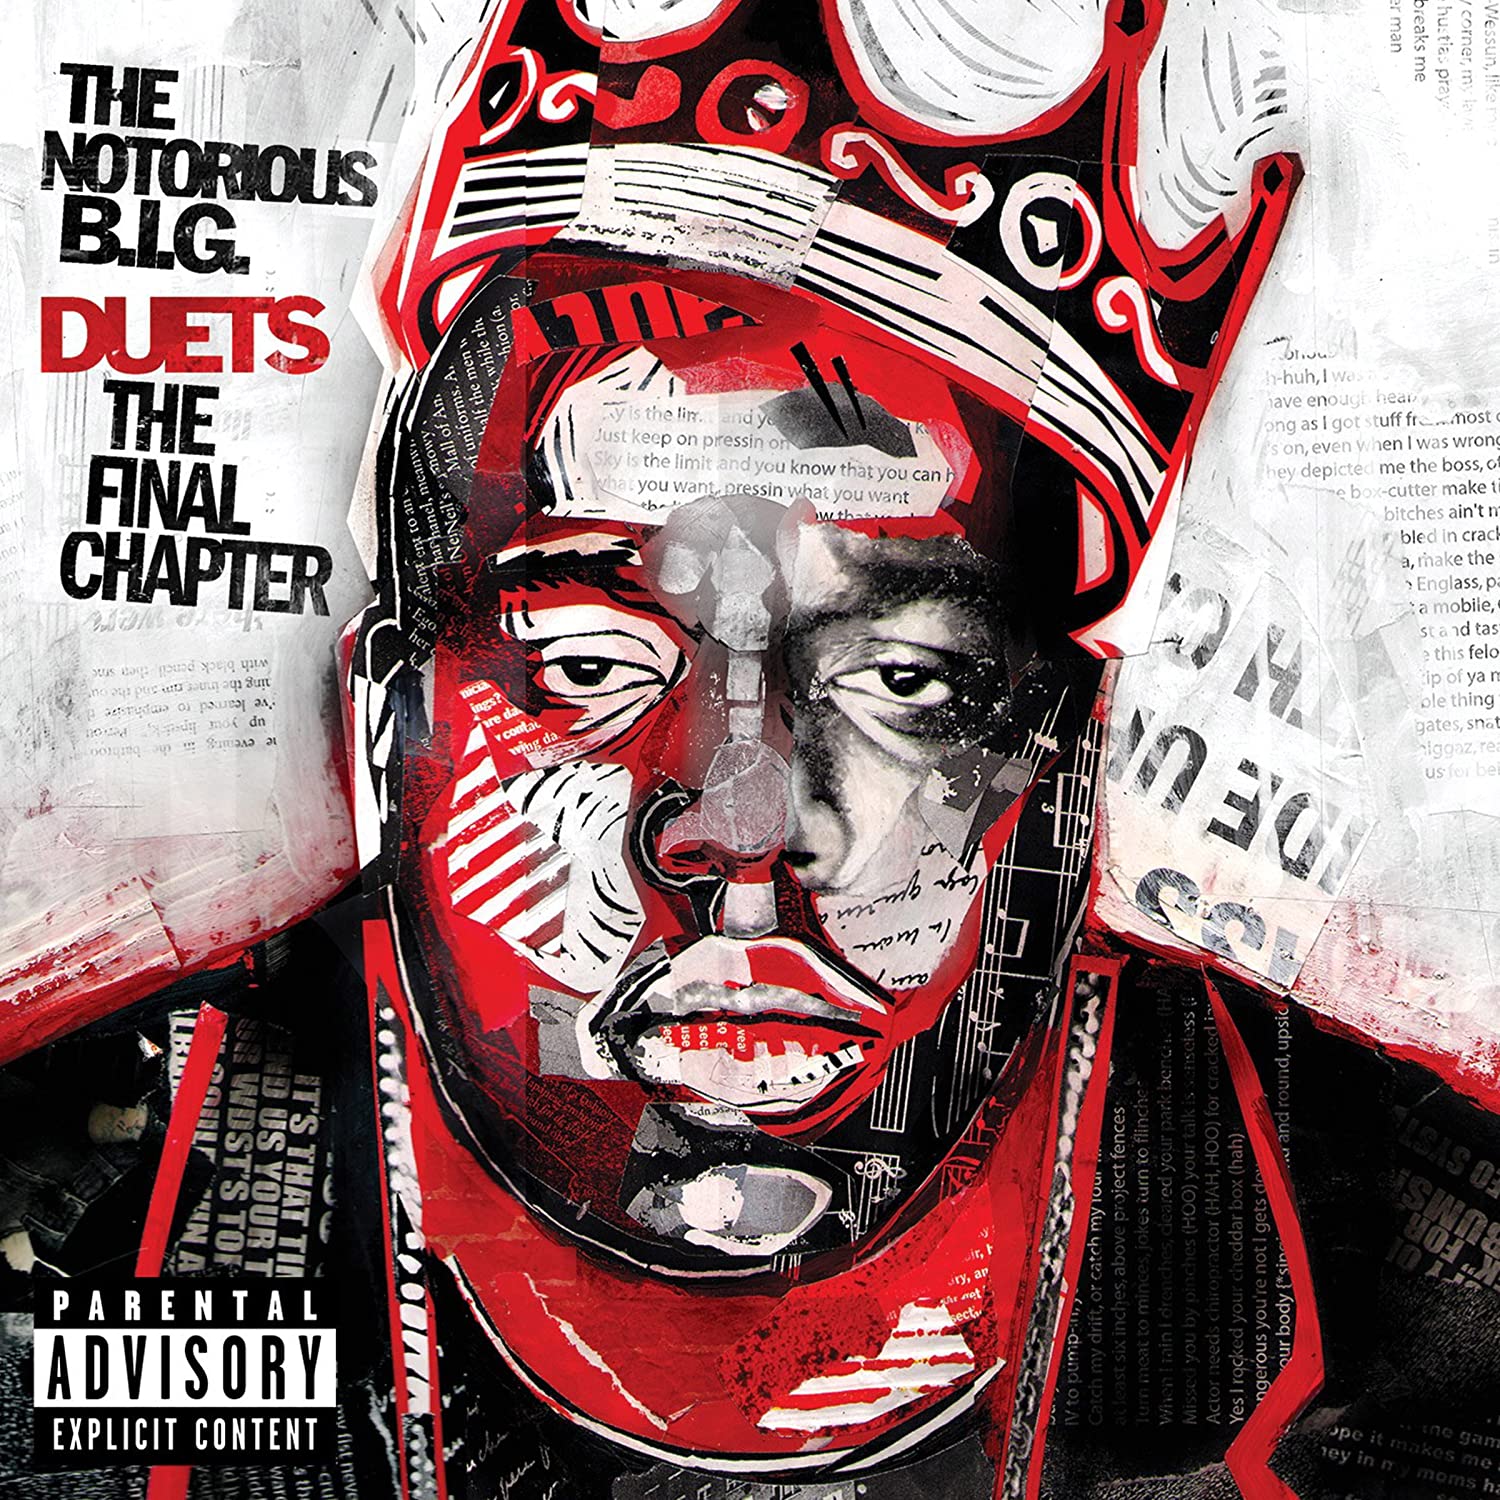 THE NOTORIOUS B.I.G. "DUETS: THE FINAL CHAPTER" 2LP